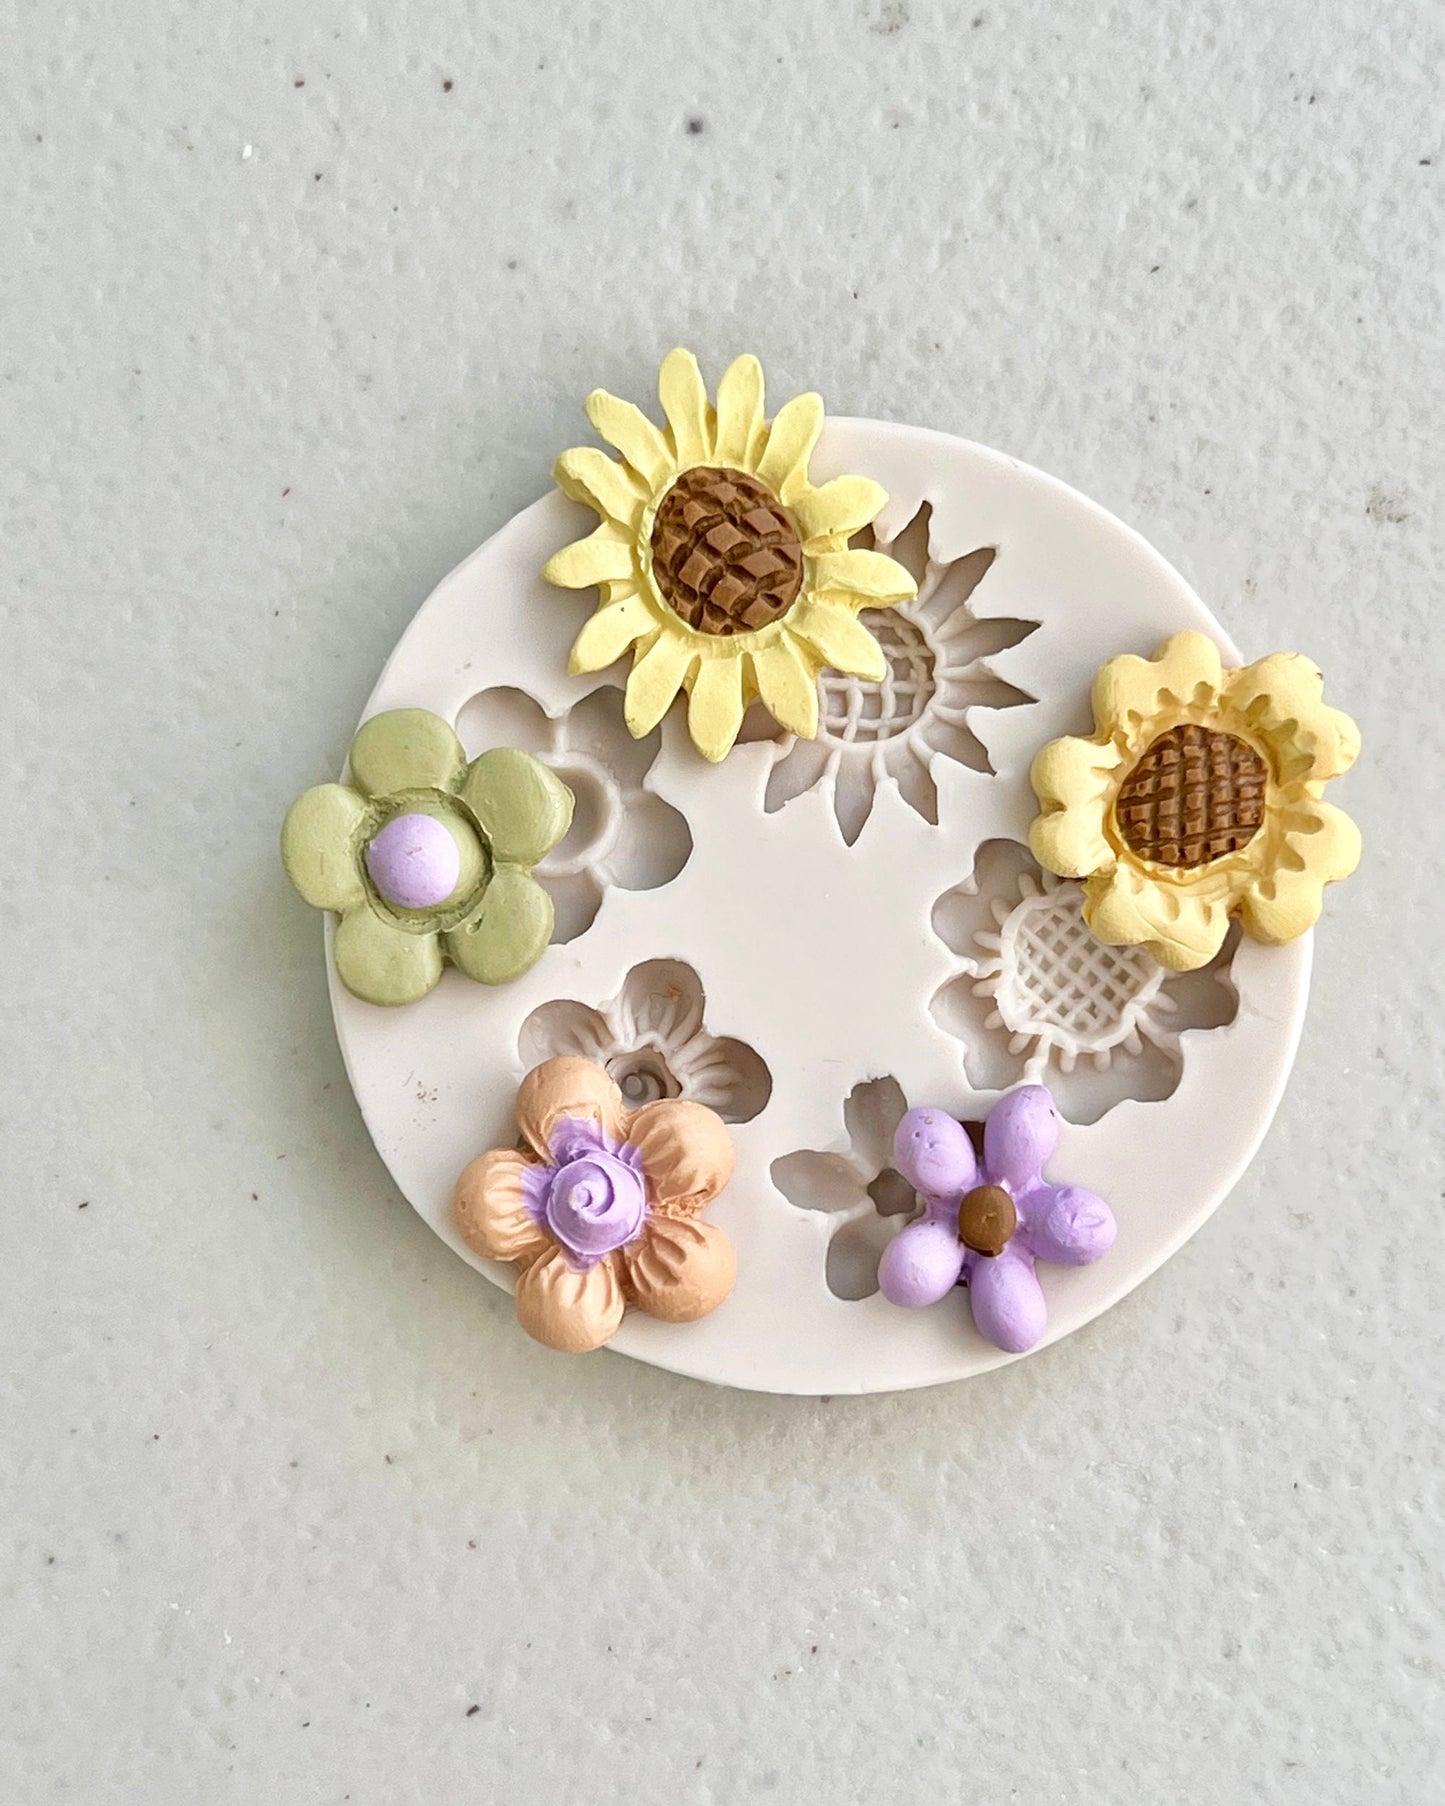 Tiny Flower Silicone Mold for Polymer Clay Earrings